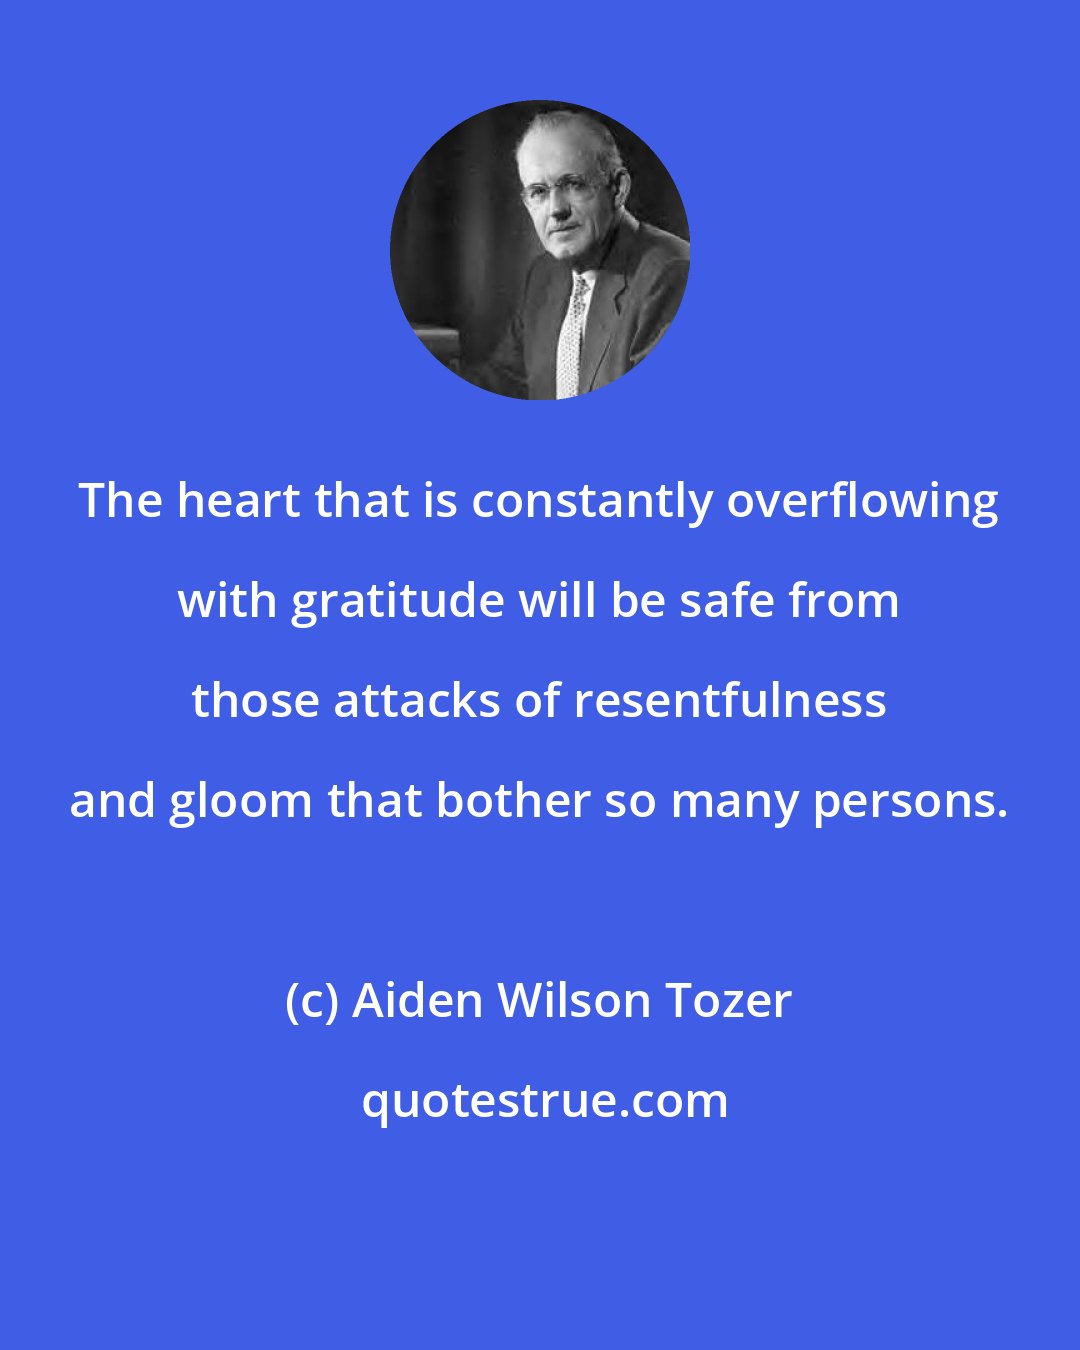 Aiden Wilson Tozer: The heart that is constantly overflowing with gratitude will be safe from those attacks of resentfulness and gloom that bother so many persons.